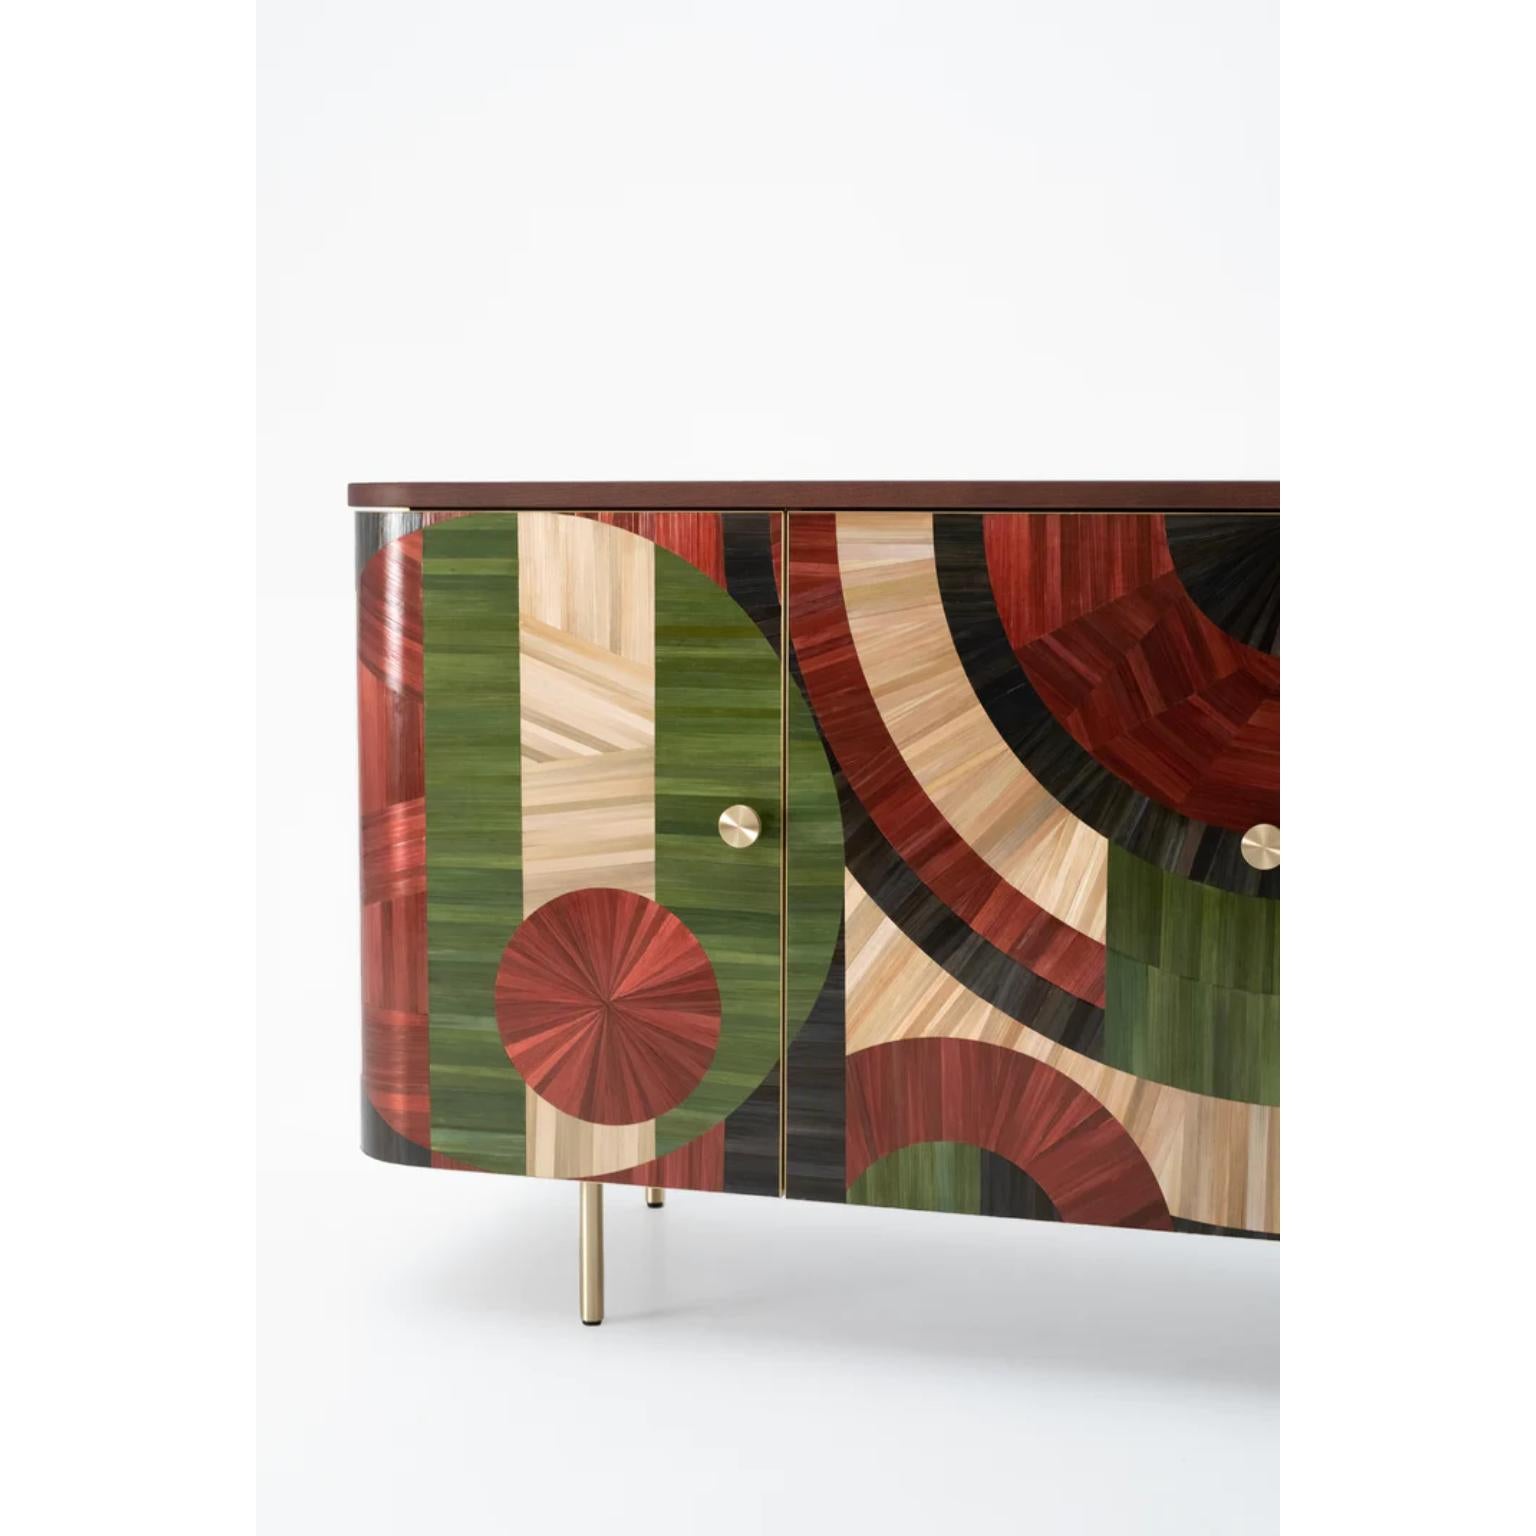 Other Solomia 3 Cabinet by Ruda Studio For Sale